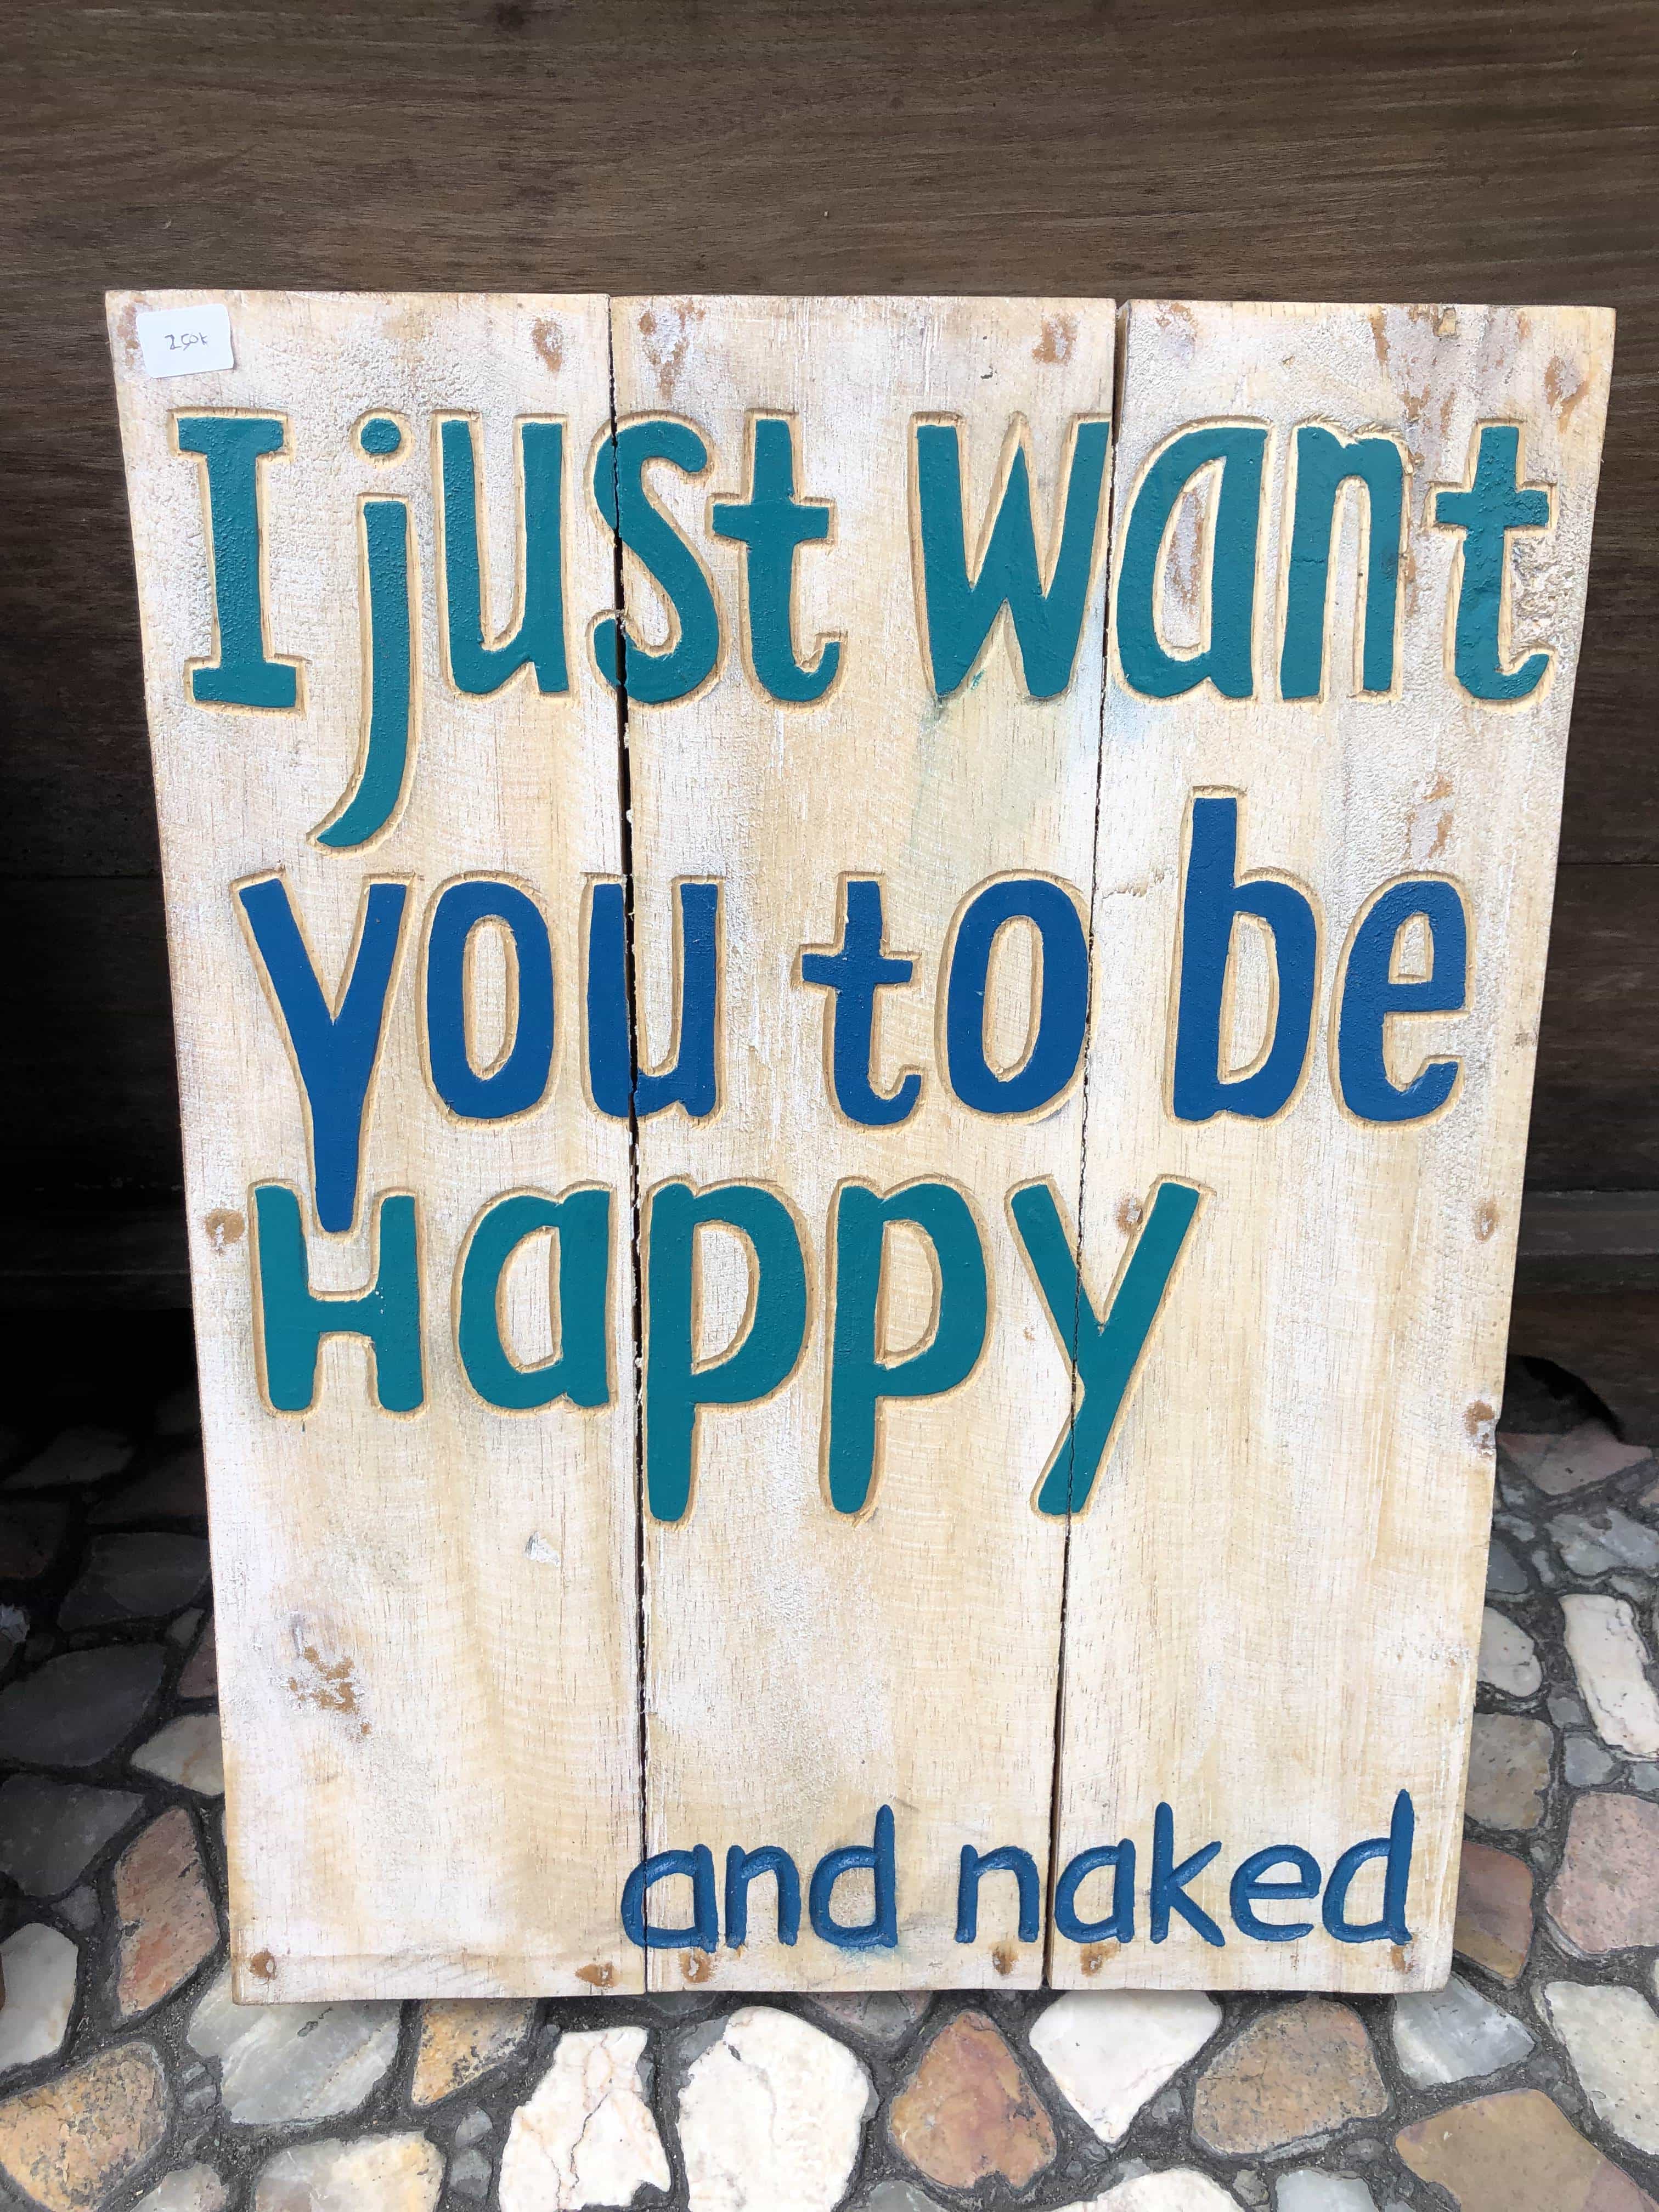 "I just want you to be happy... and naked"